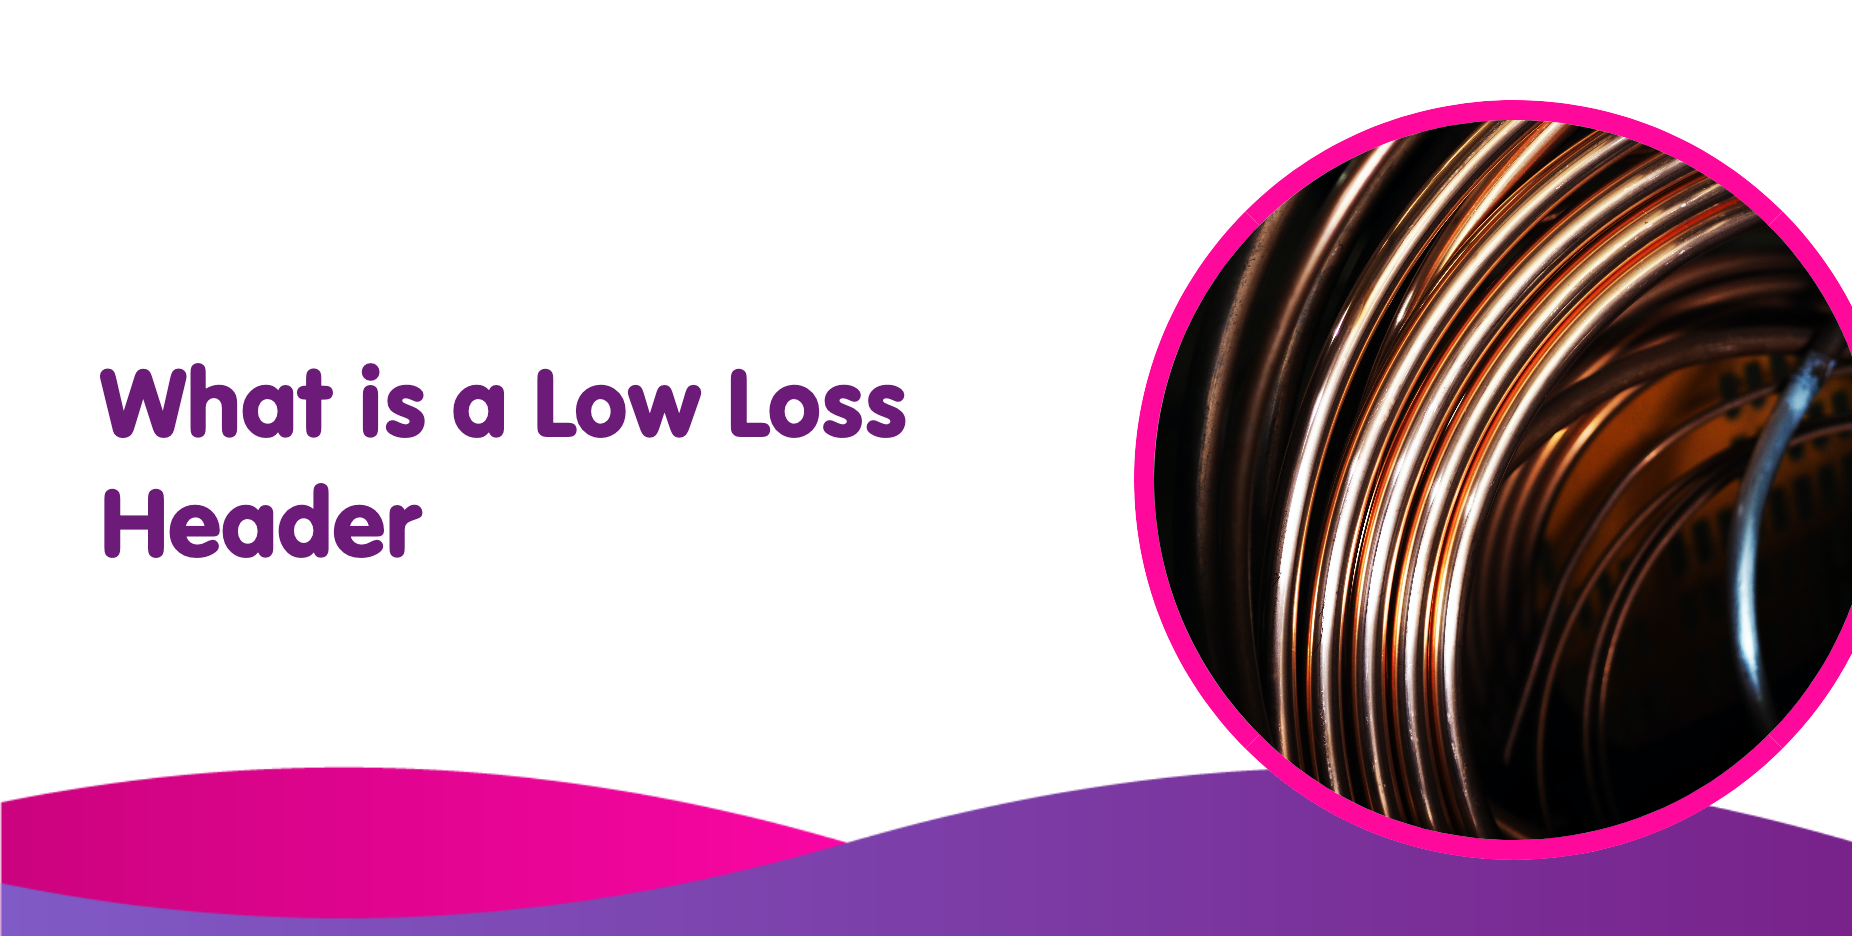 What Is a Low Loss Header?